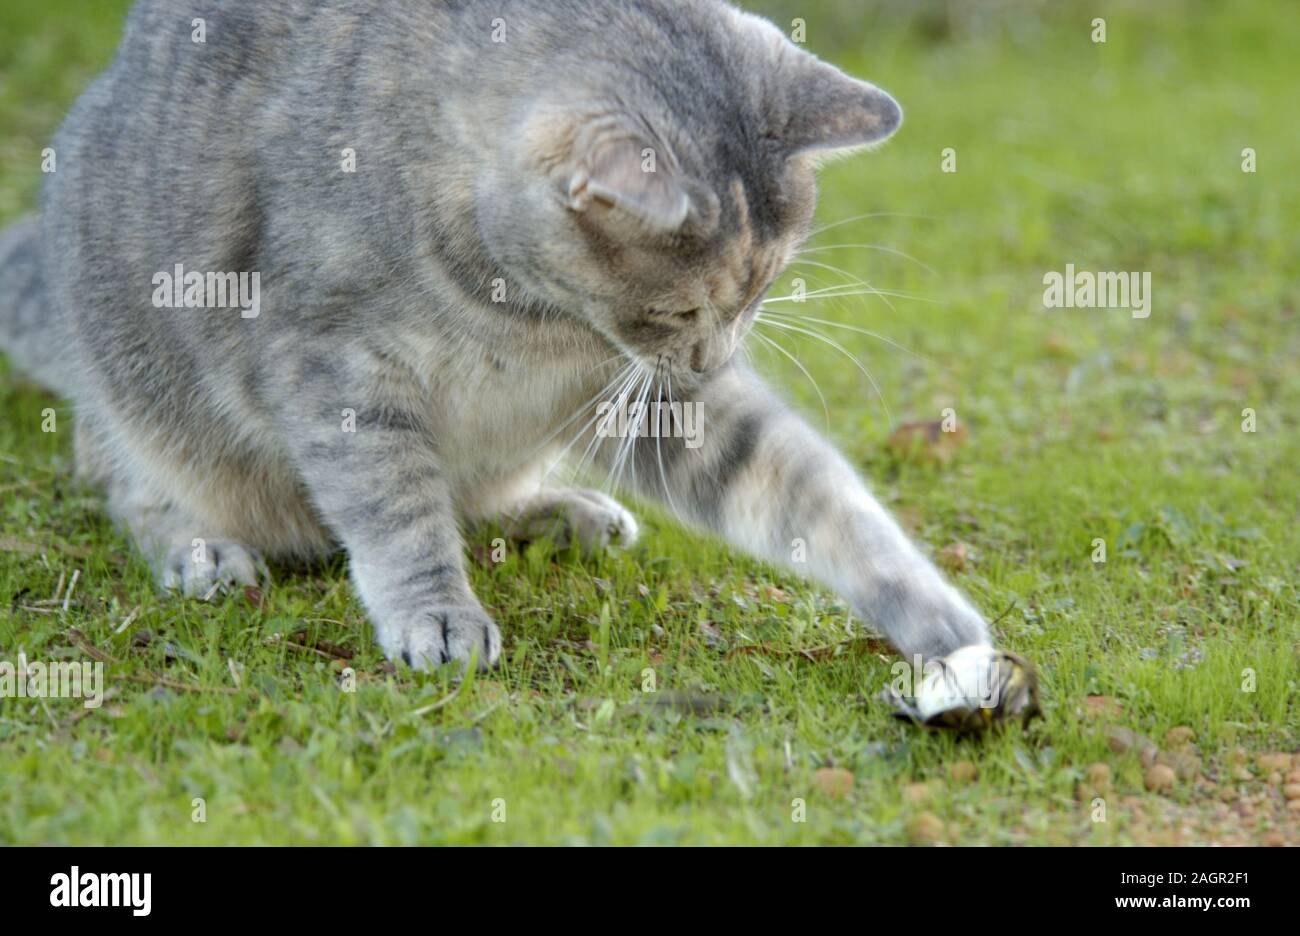 A DOMESTIC CAT PAWS A HONEY-EATER BIRD WHICH IT HAS JUST KILLED. Stock Photo